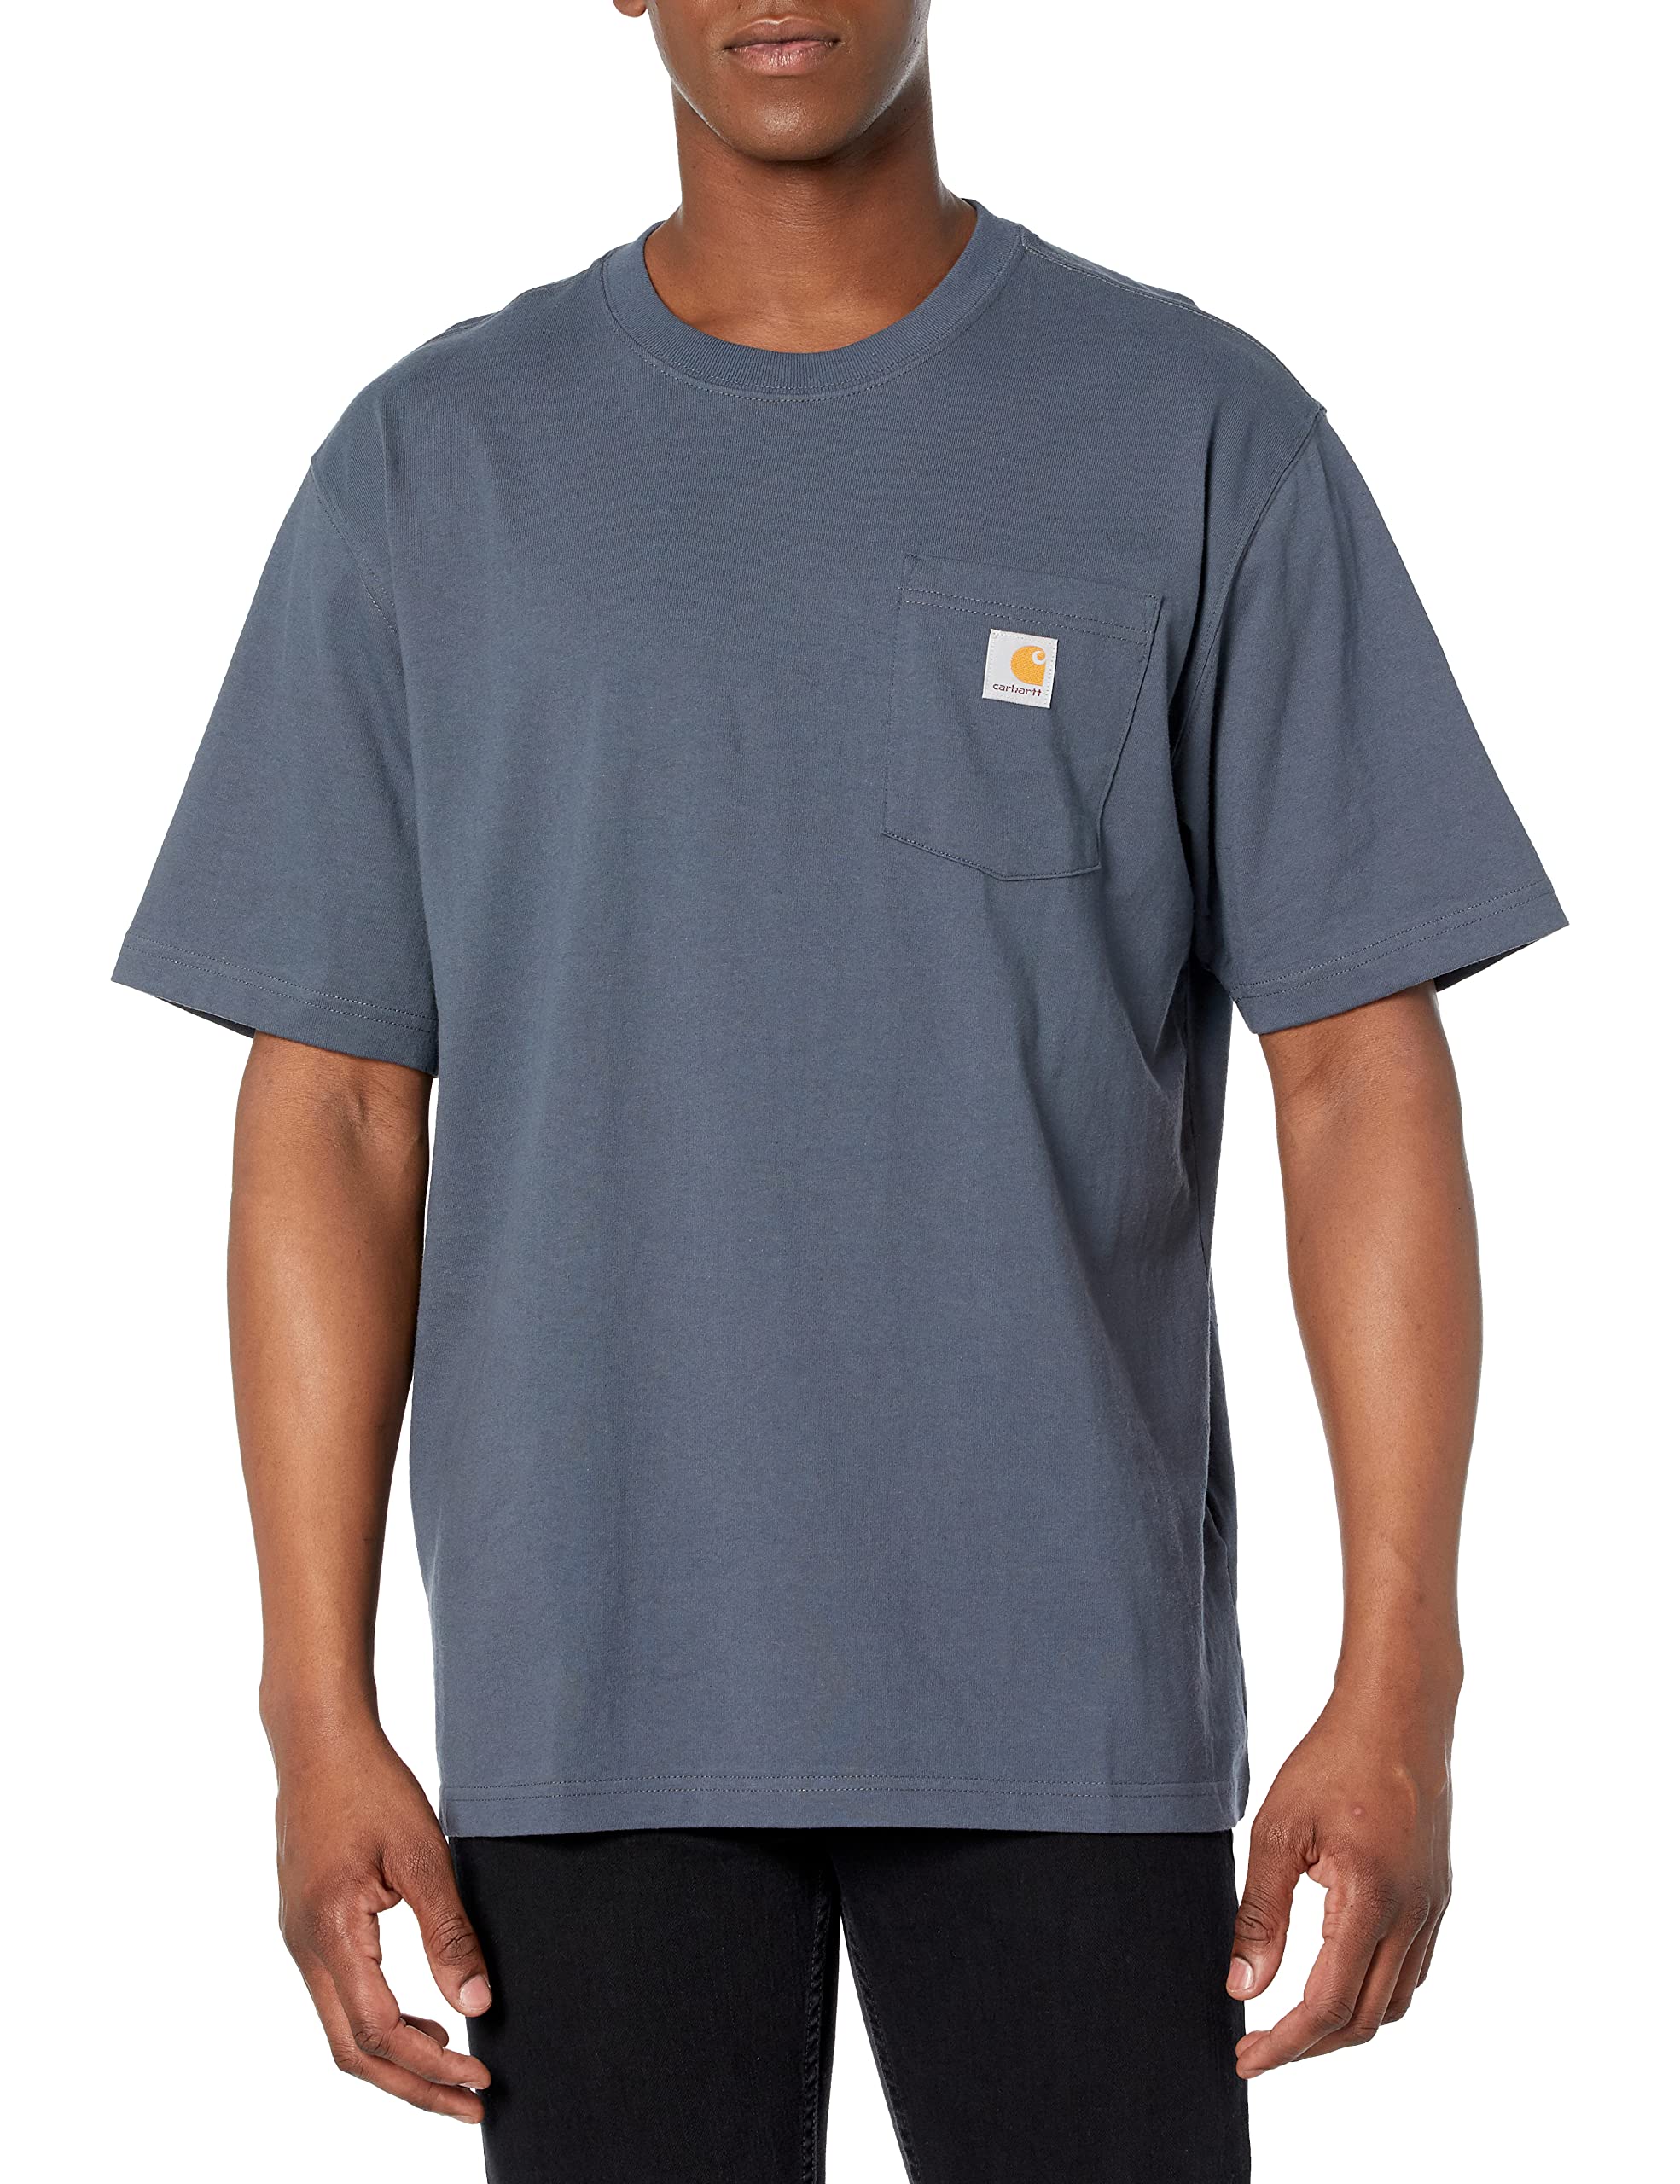 Limited-time deal: Carhartt Men's Loose Fit Heavyweight Short-Sleeve Pocket T-Shirt - $14.99 at Amazon